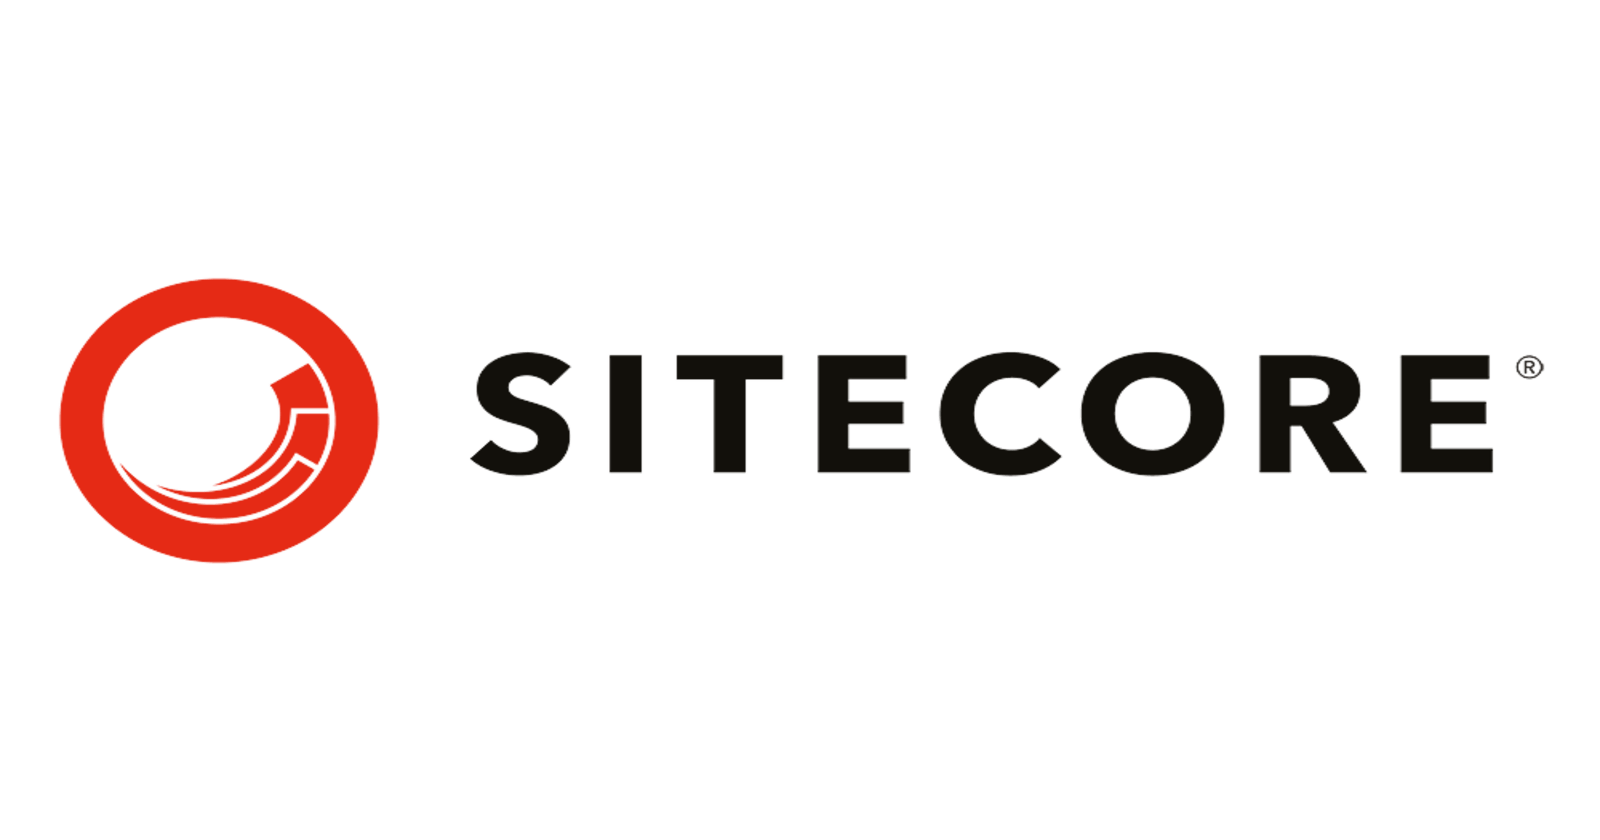 What is Sitecore?